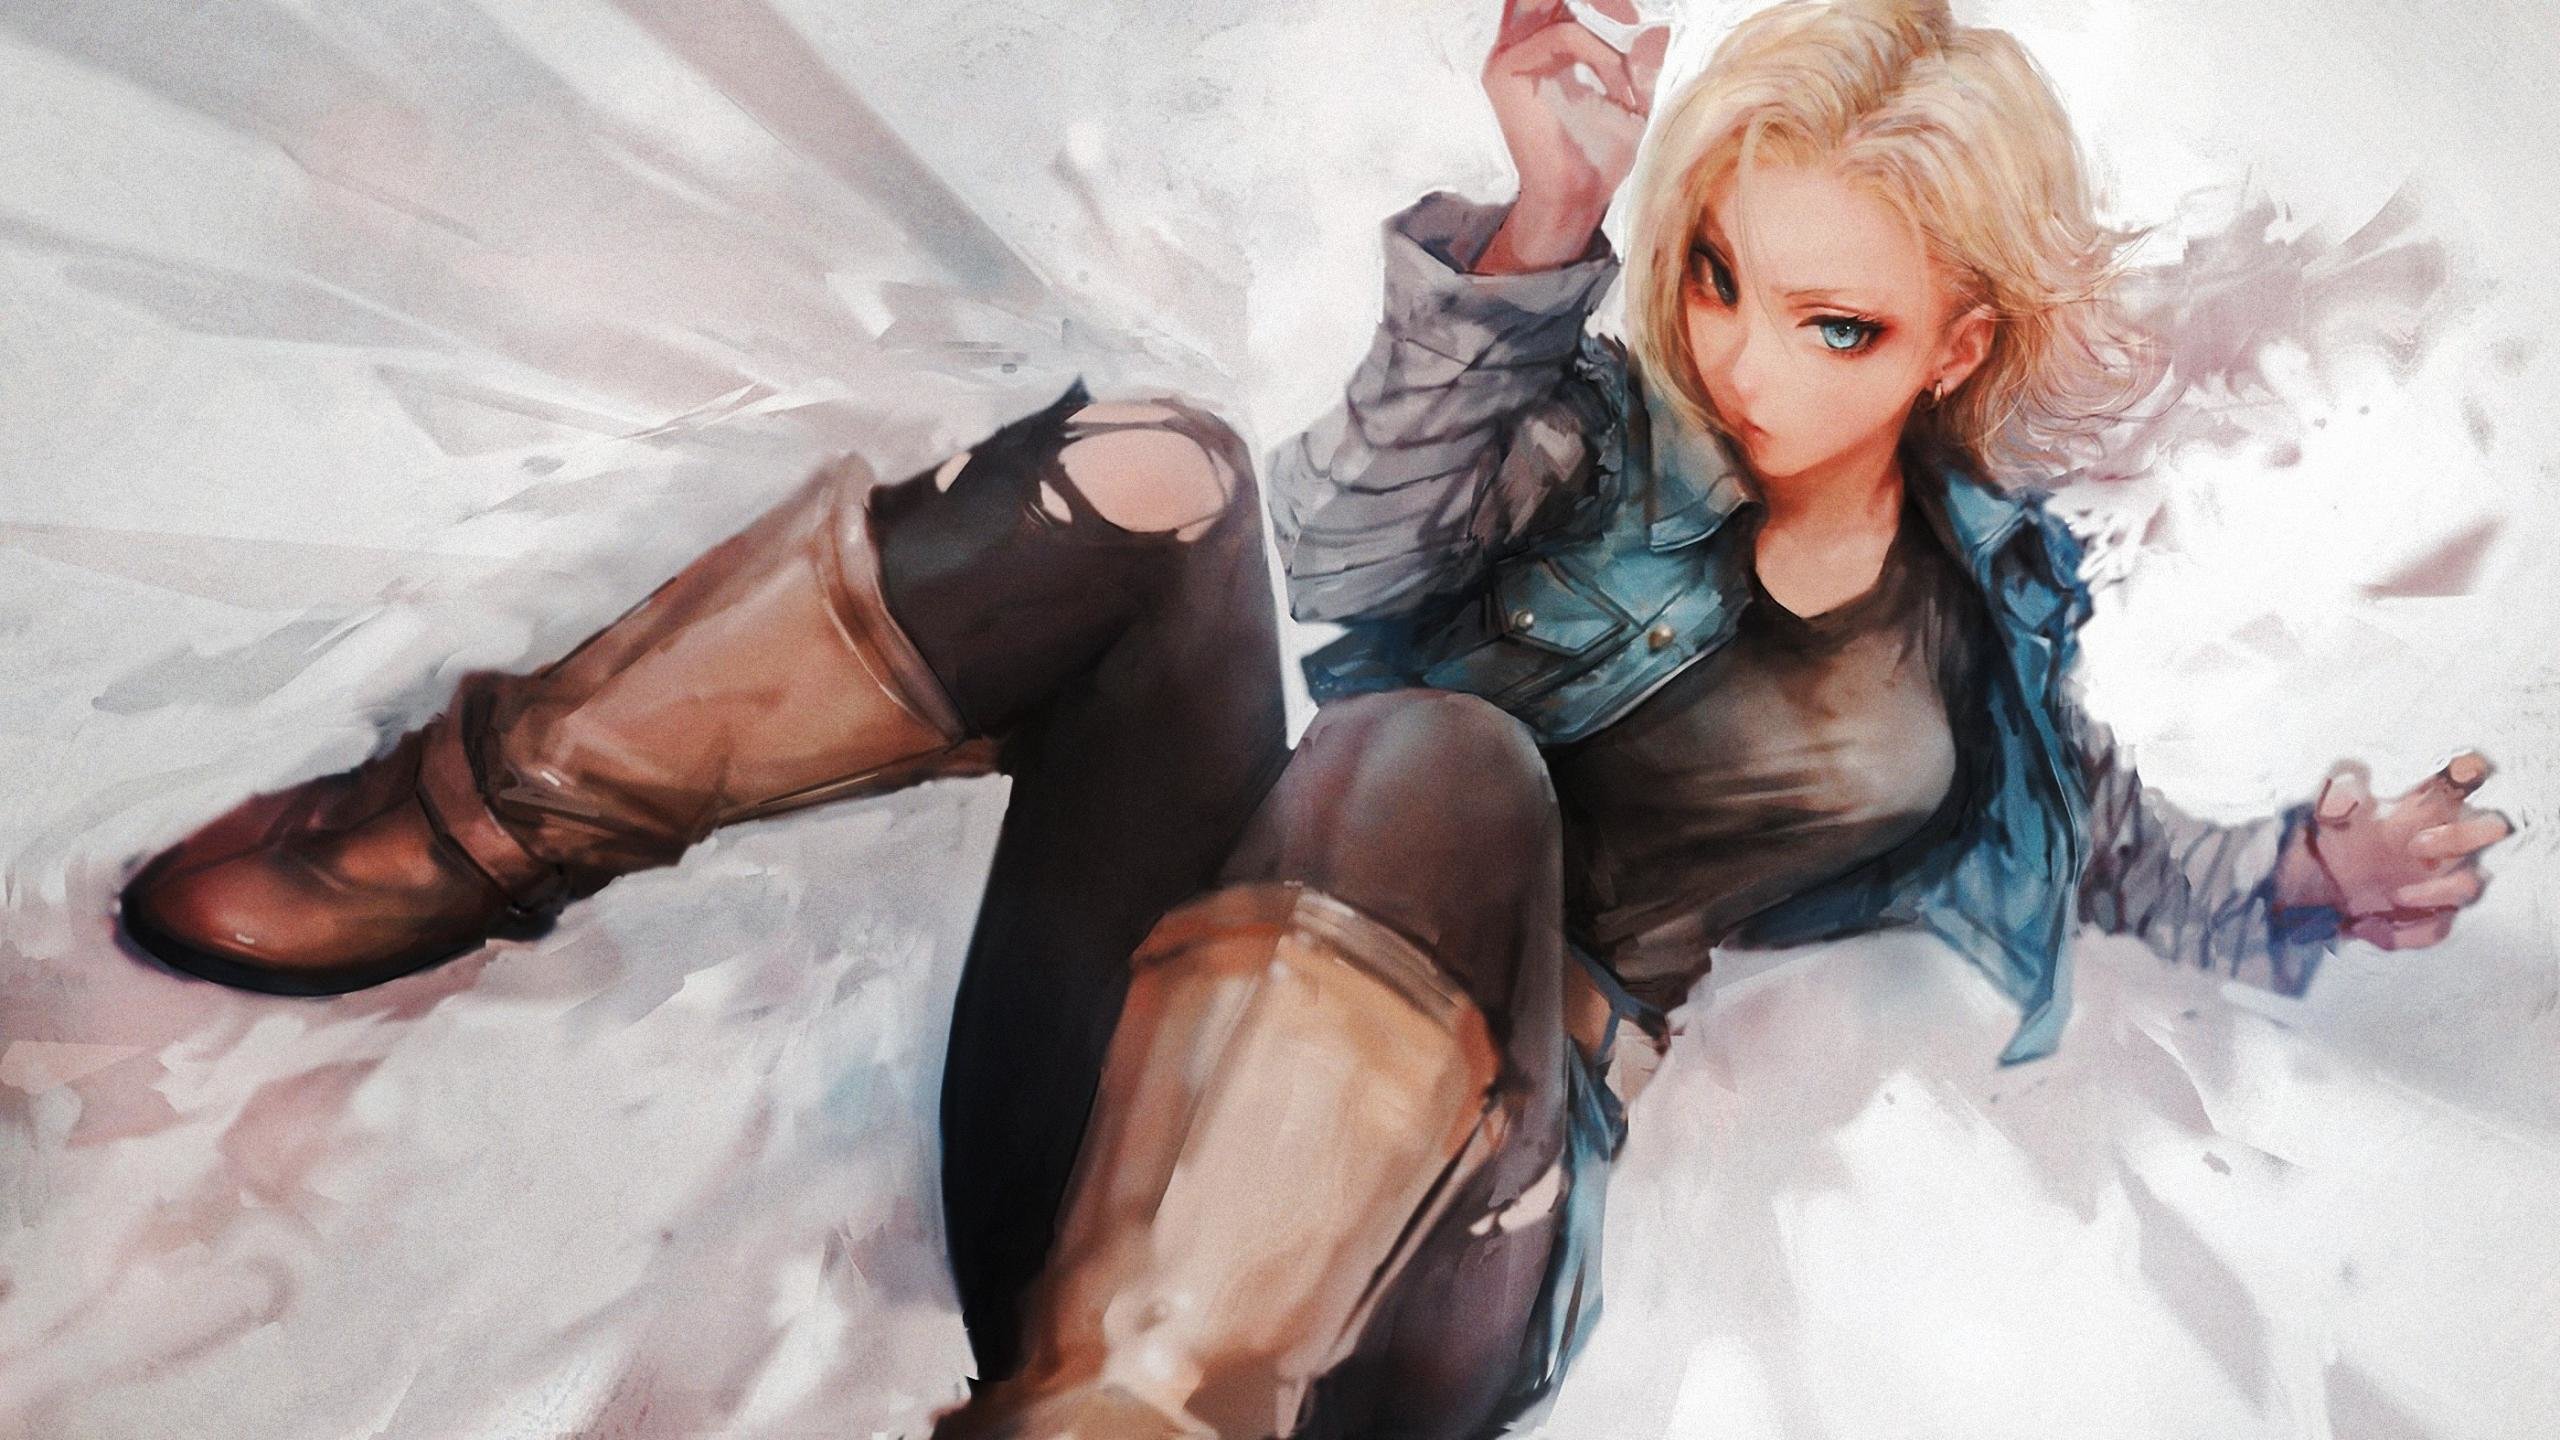 Awesome Android 18 Free Wallpaper Id Android 18 2560x1440 Wallpaper Teahub Io